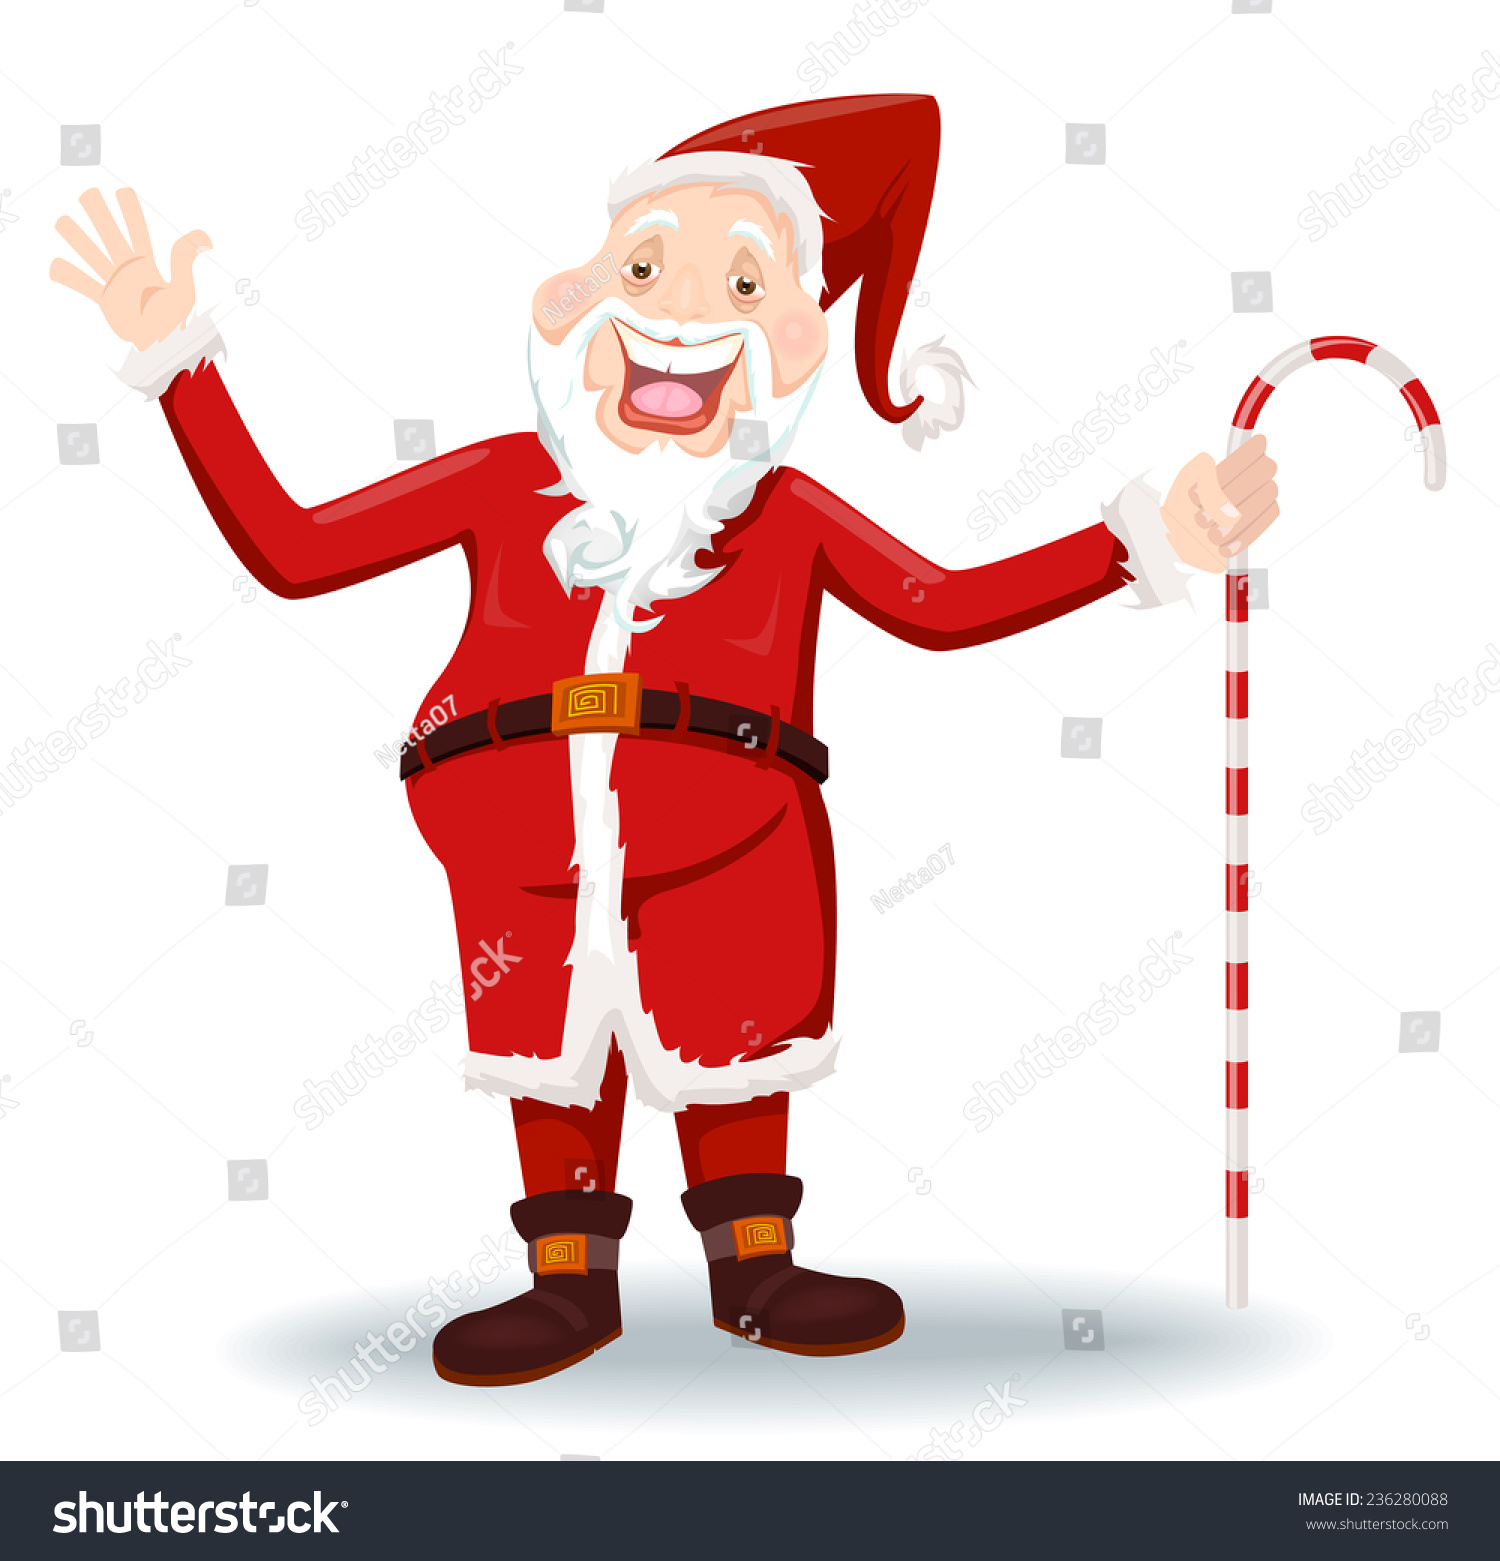 Santa Claus With Stick Waving His Hand Vector Illustration 236280088 Shutterstock